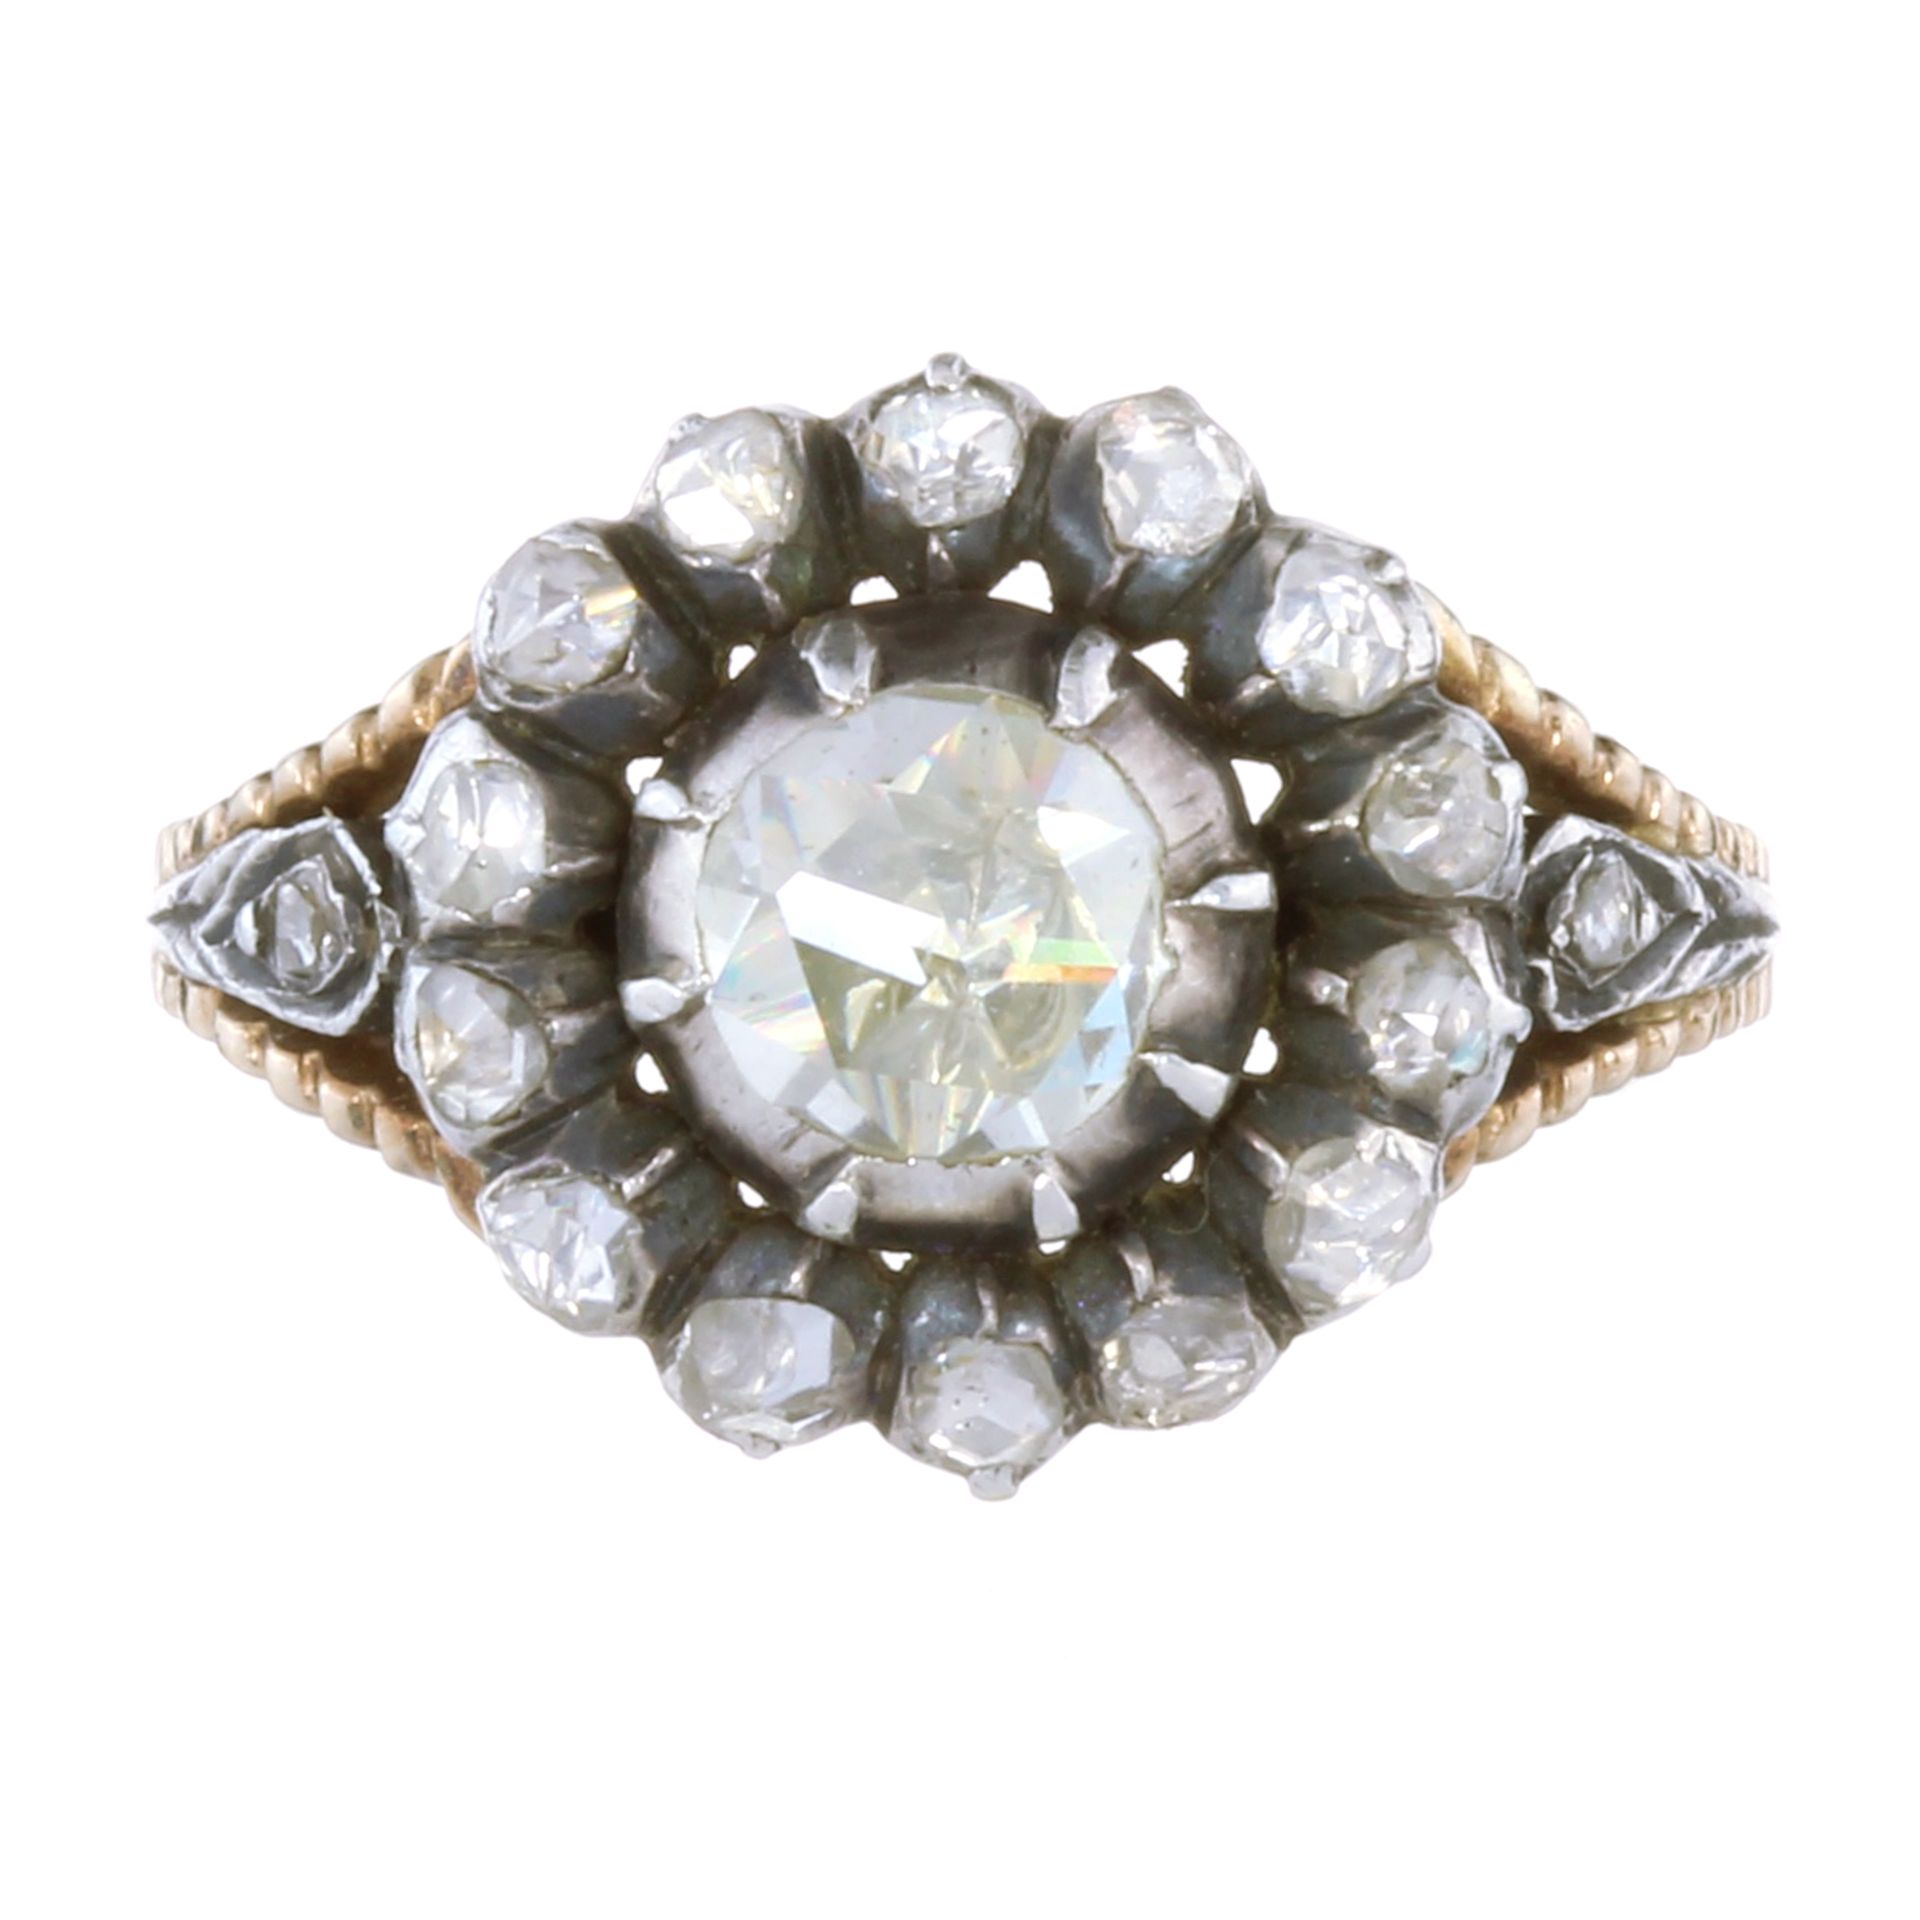 AN ANTIQUE DIAMOND CLUSTER DRESS RING in high carat yellow gold and silver set with a central rose